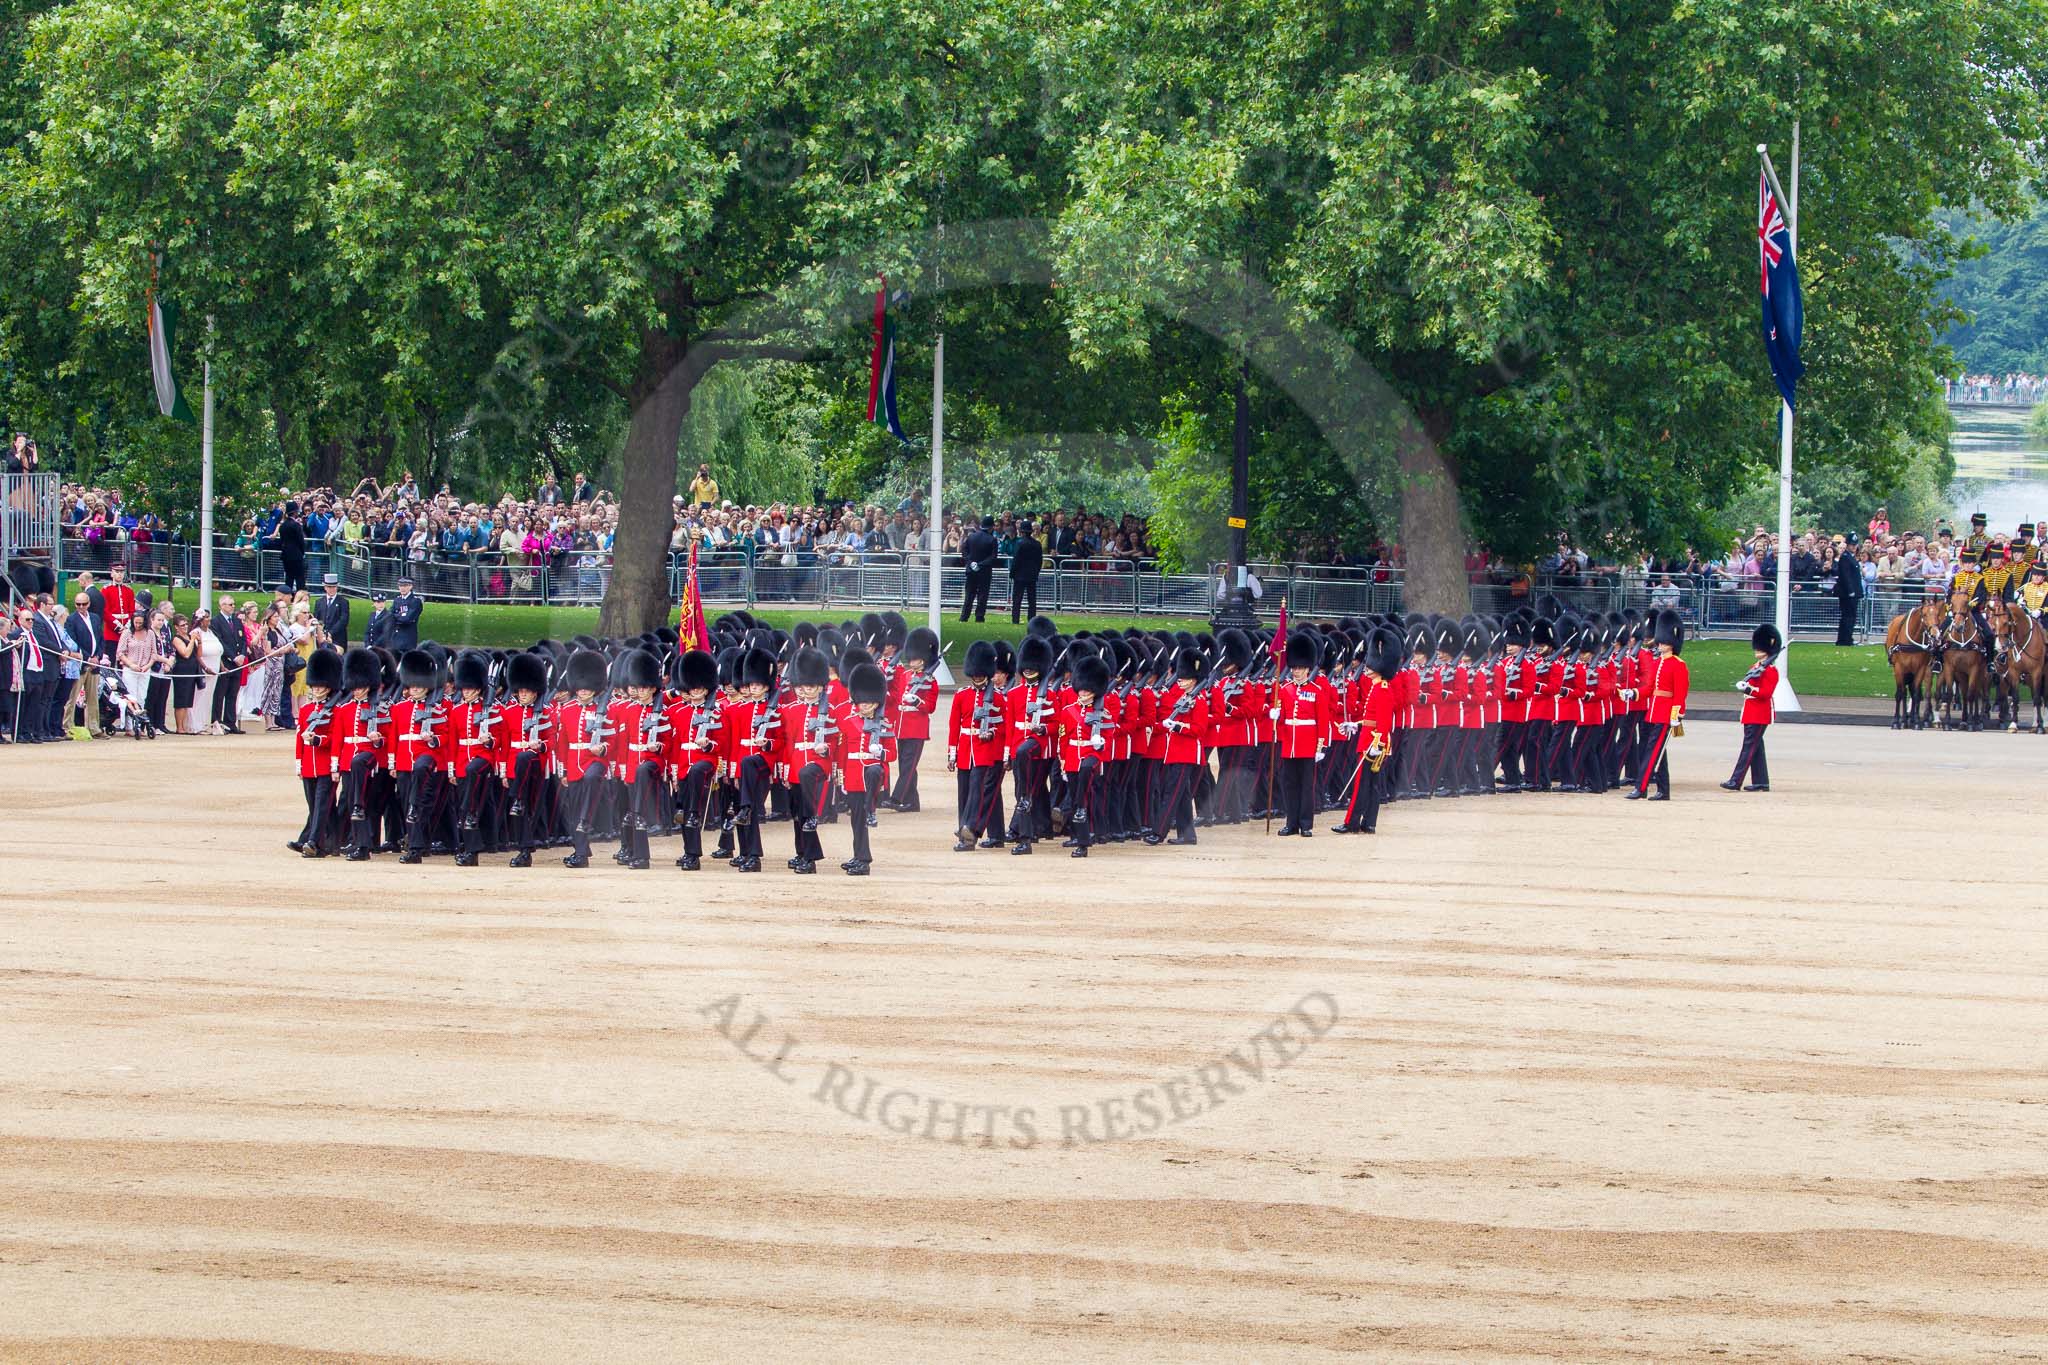 Trooping the Colour 2014.
Horse Guards Parade, Westminster,
London SW1A,

United Kingdom,
on 14 June 2014 at 11:33, image #595